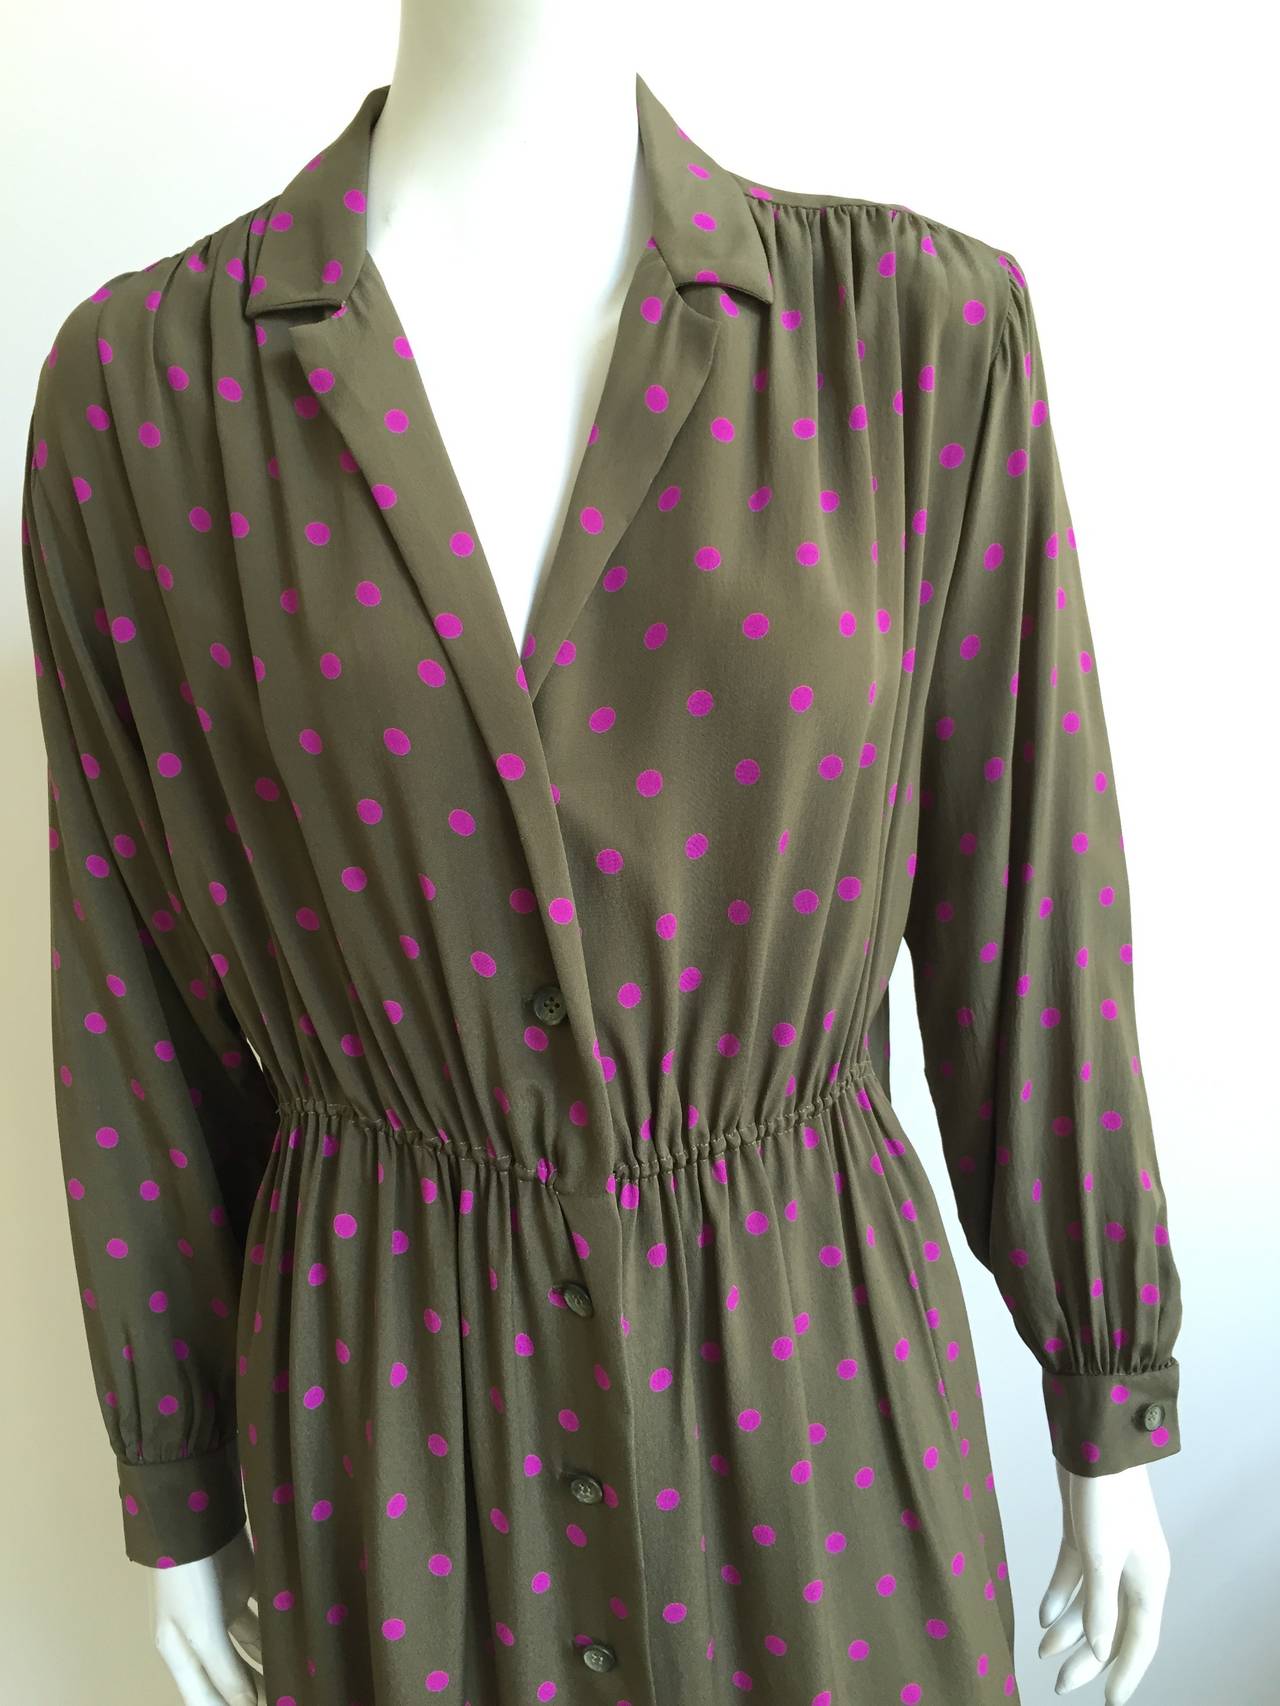 Bill Blass 1970s silk polka dot pattern button up dress with back side cape is a vintage size 12 but fits like a modern USA size 8 ( Please see & use measurements so that you know this treasure will fit your body the way Bill Blass would want it